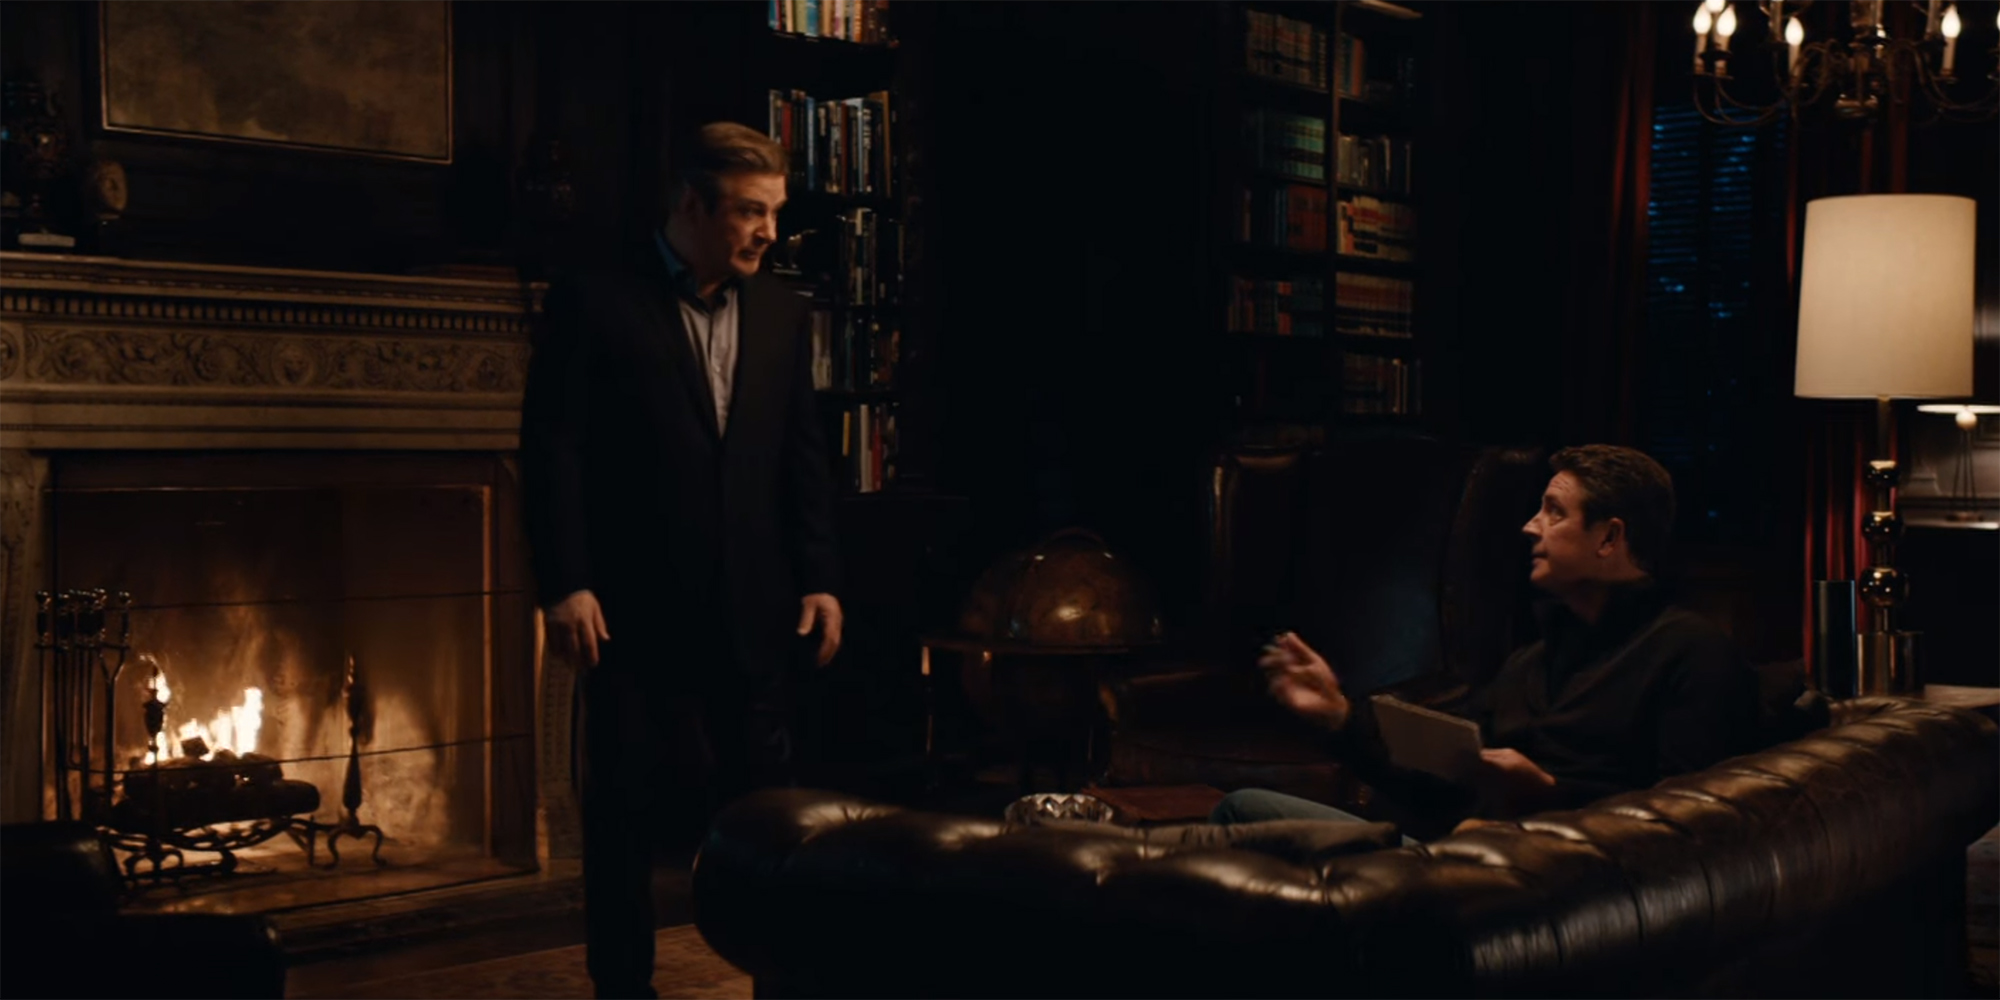 Check out Amazon's Super Bowl commercial starring Alec Baldwin and Dan